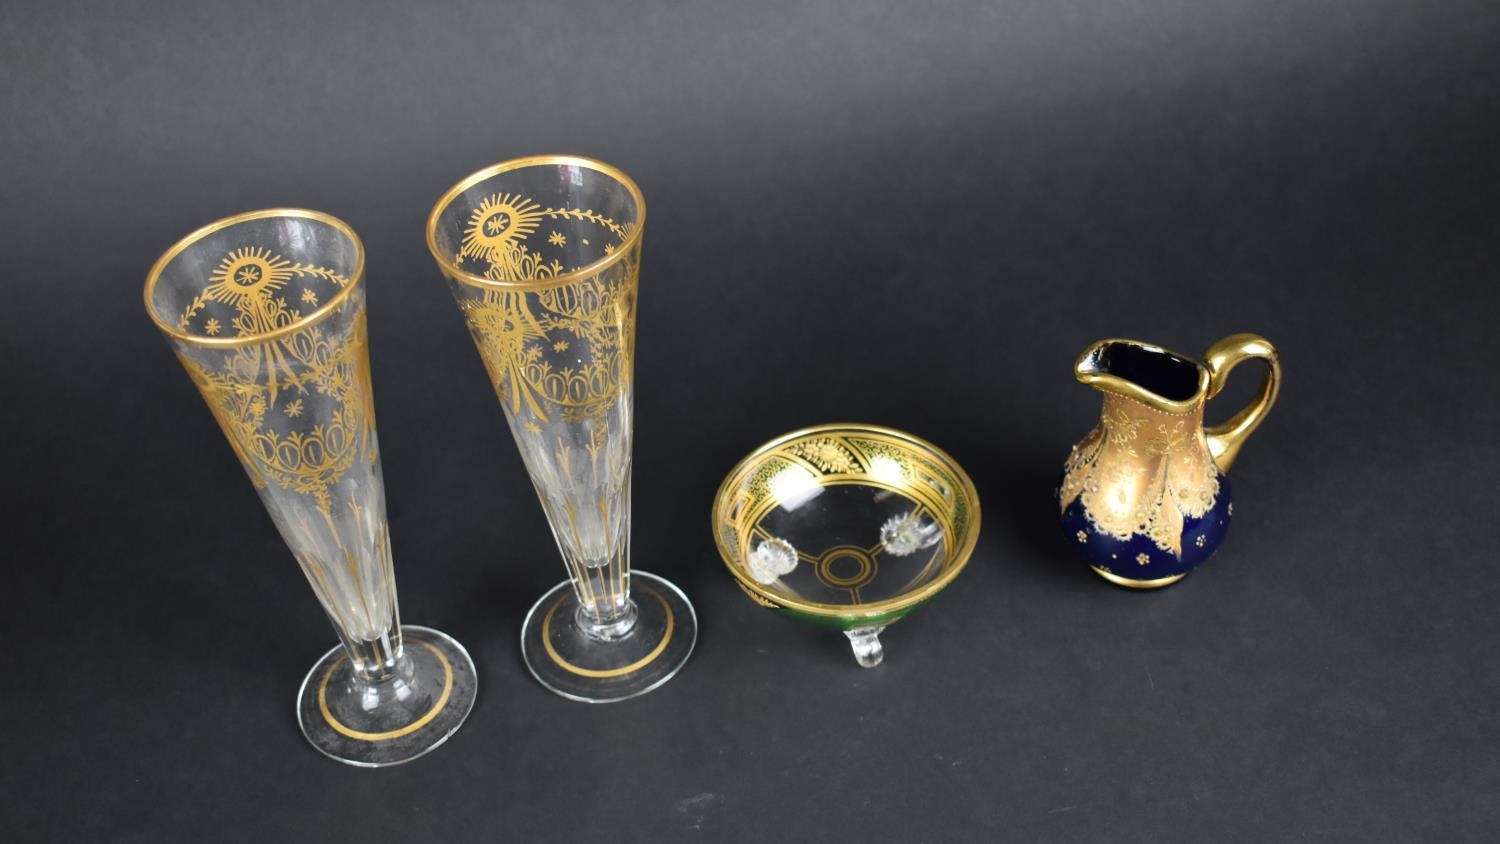 A Pair of 19th Century Drinking Glasses with Flute Bowls Decorated in Gilt with Swag Decoration 19. - Image 2 of 2